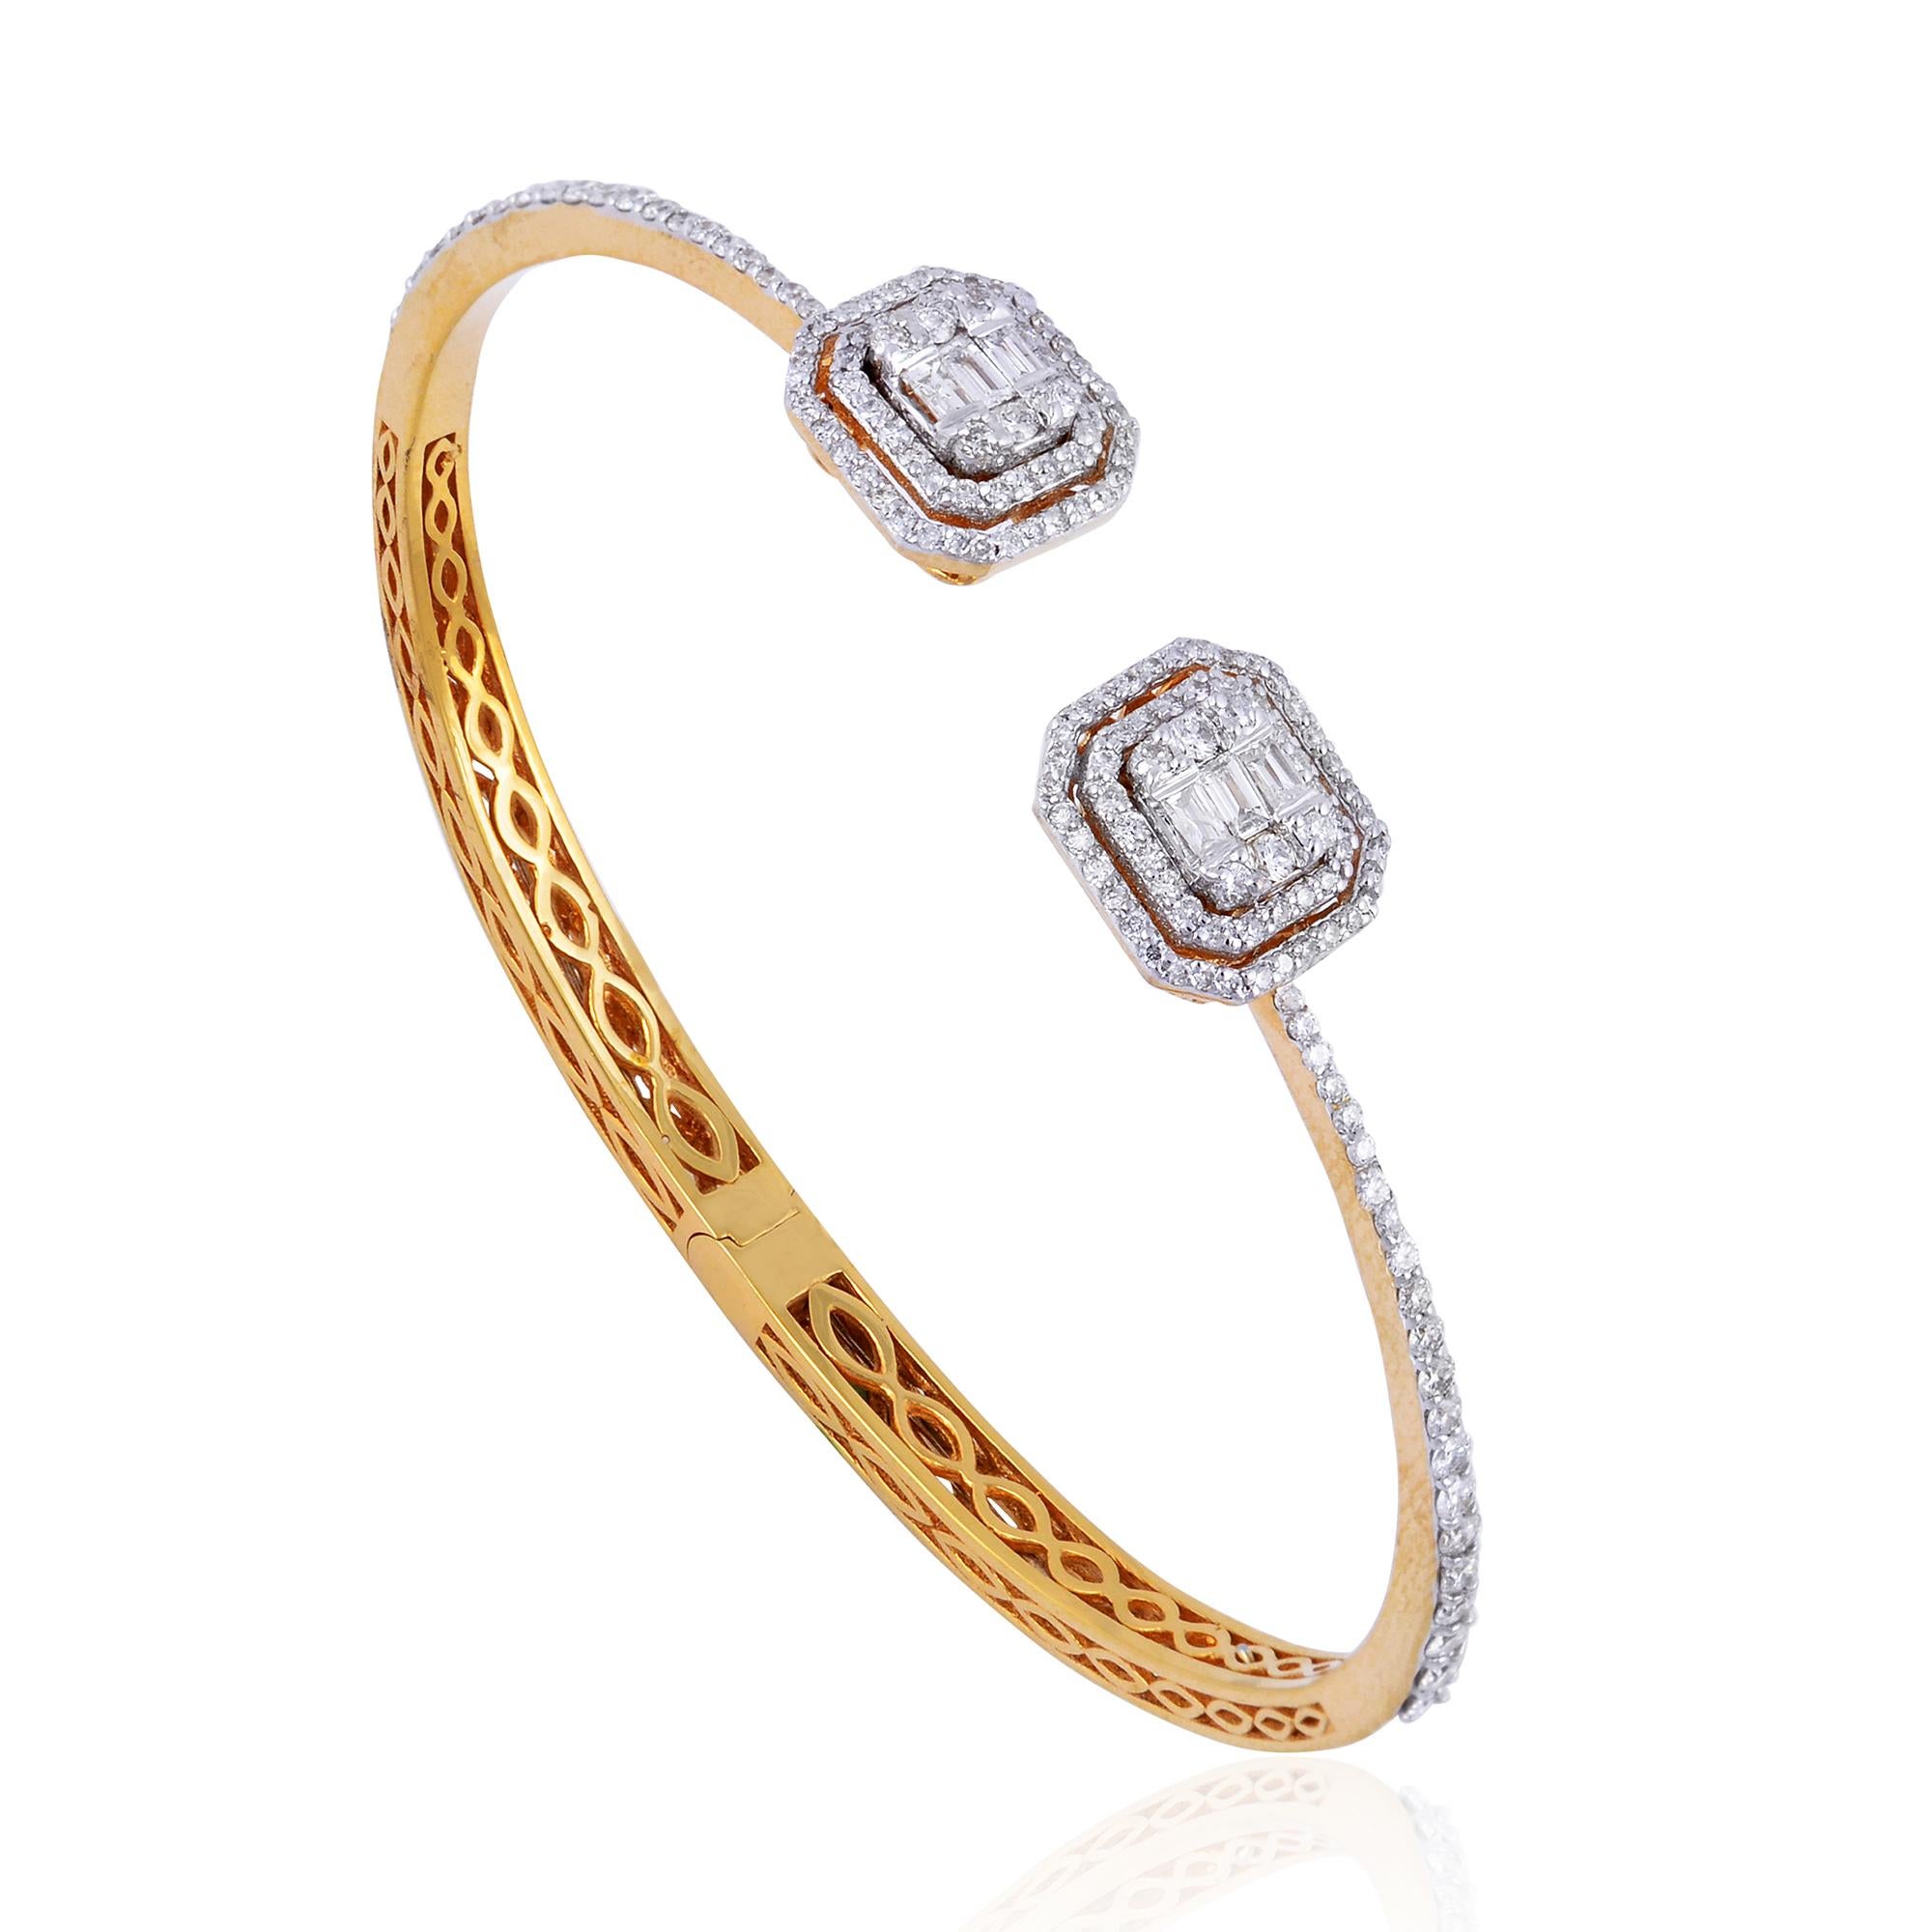 Crafted with precision and attention to detail, this cuff bangle bracelet is designed to effortlessly grace the wrist with its sleek and sophisticated silhouette. The 14 karat yellow gold setting provides a warm and radiant backdrop for the